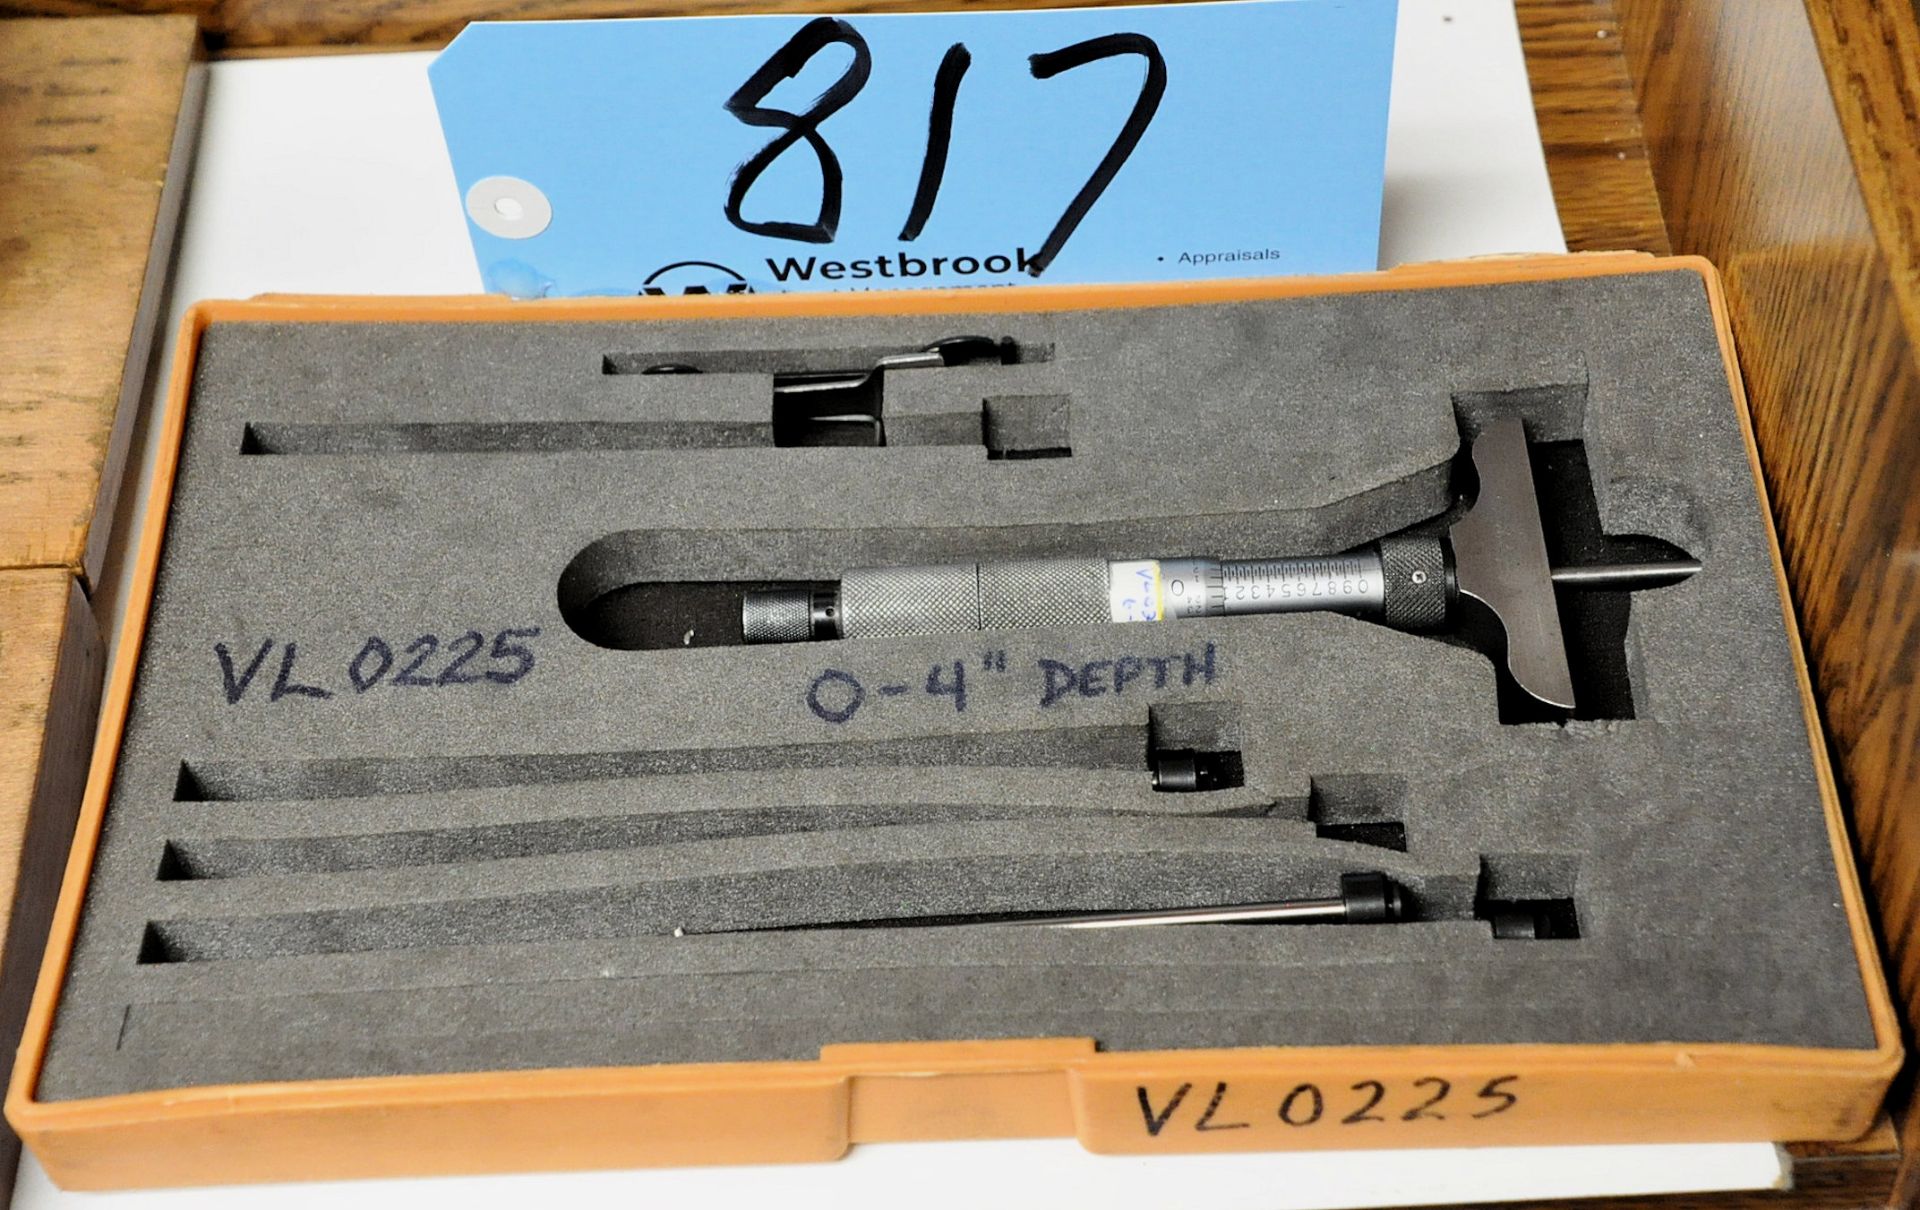 Lot-(1) Starrett, (1) Mitutoyo and (1) No Name Depth Micrometer Sets with Cases - Image 2 of 4